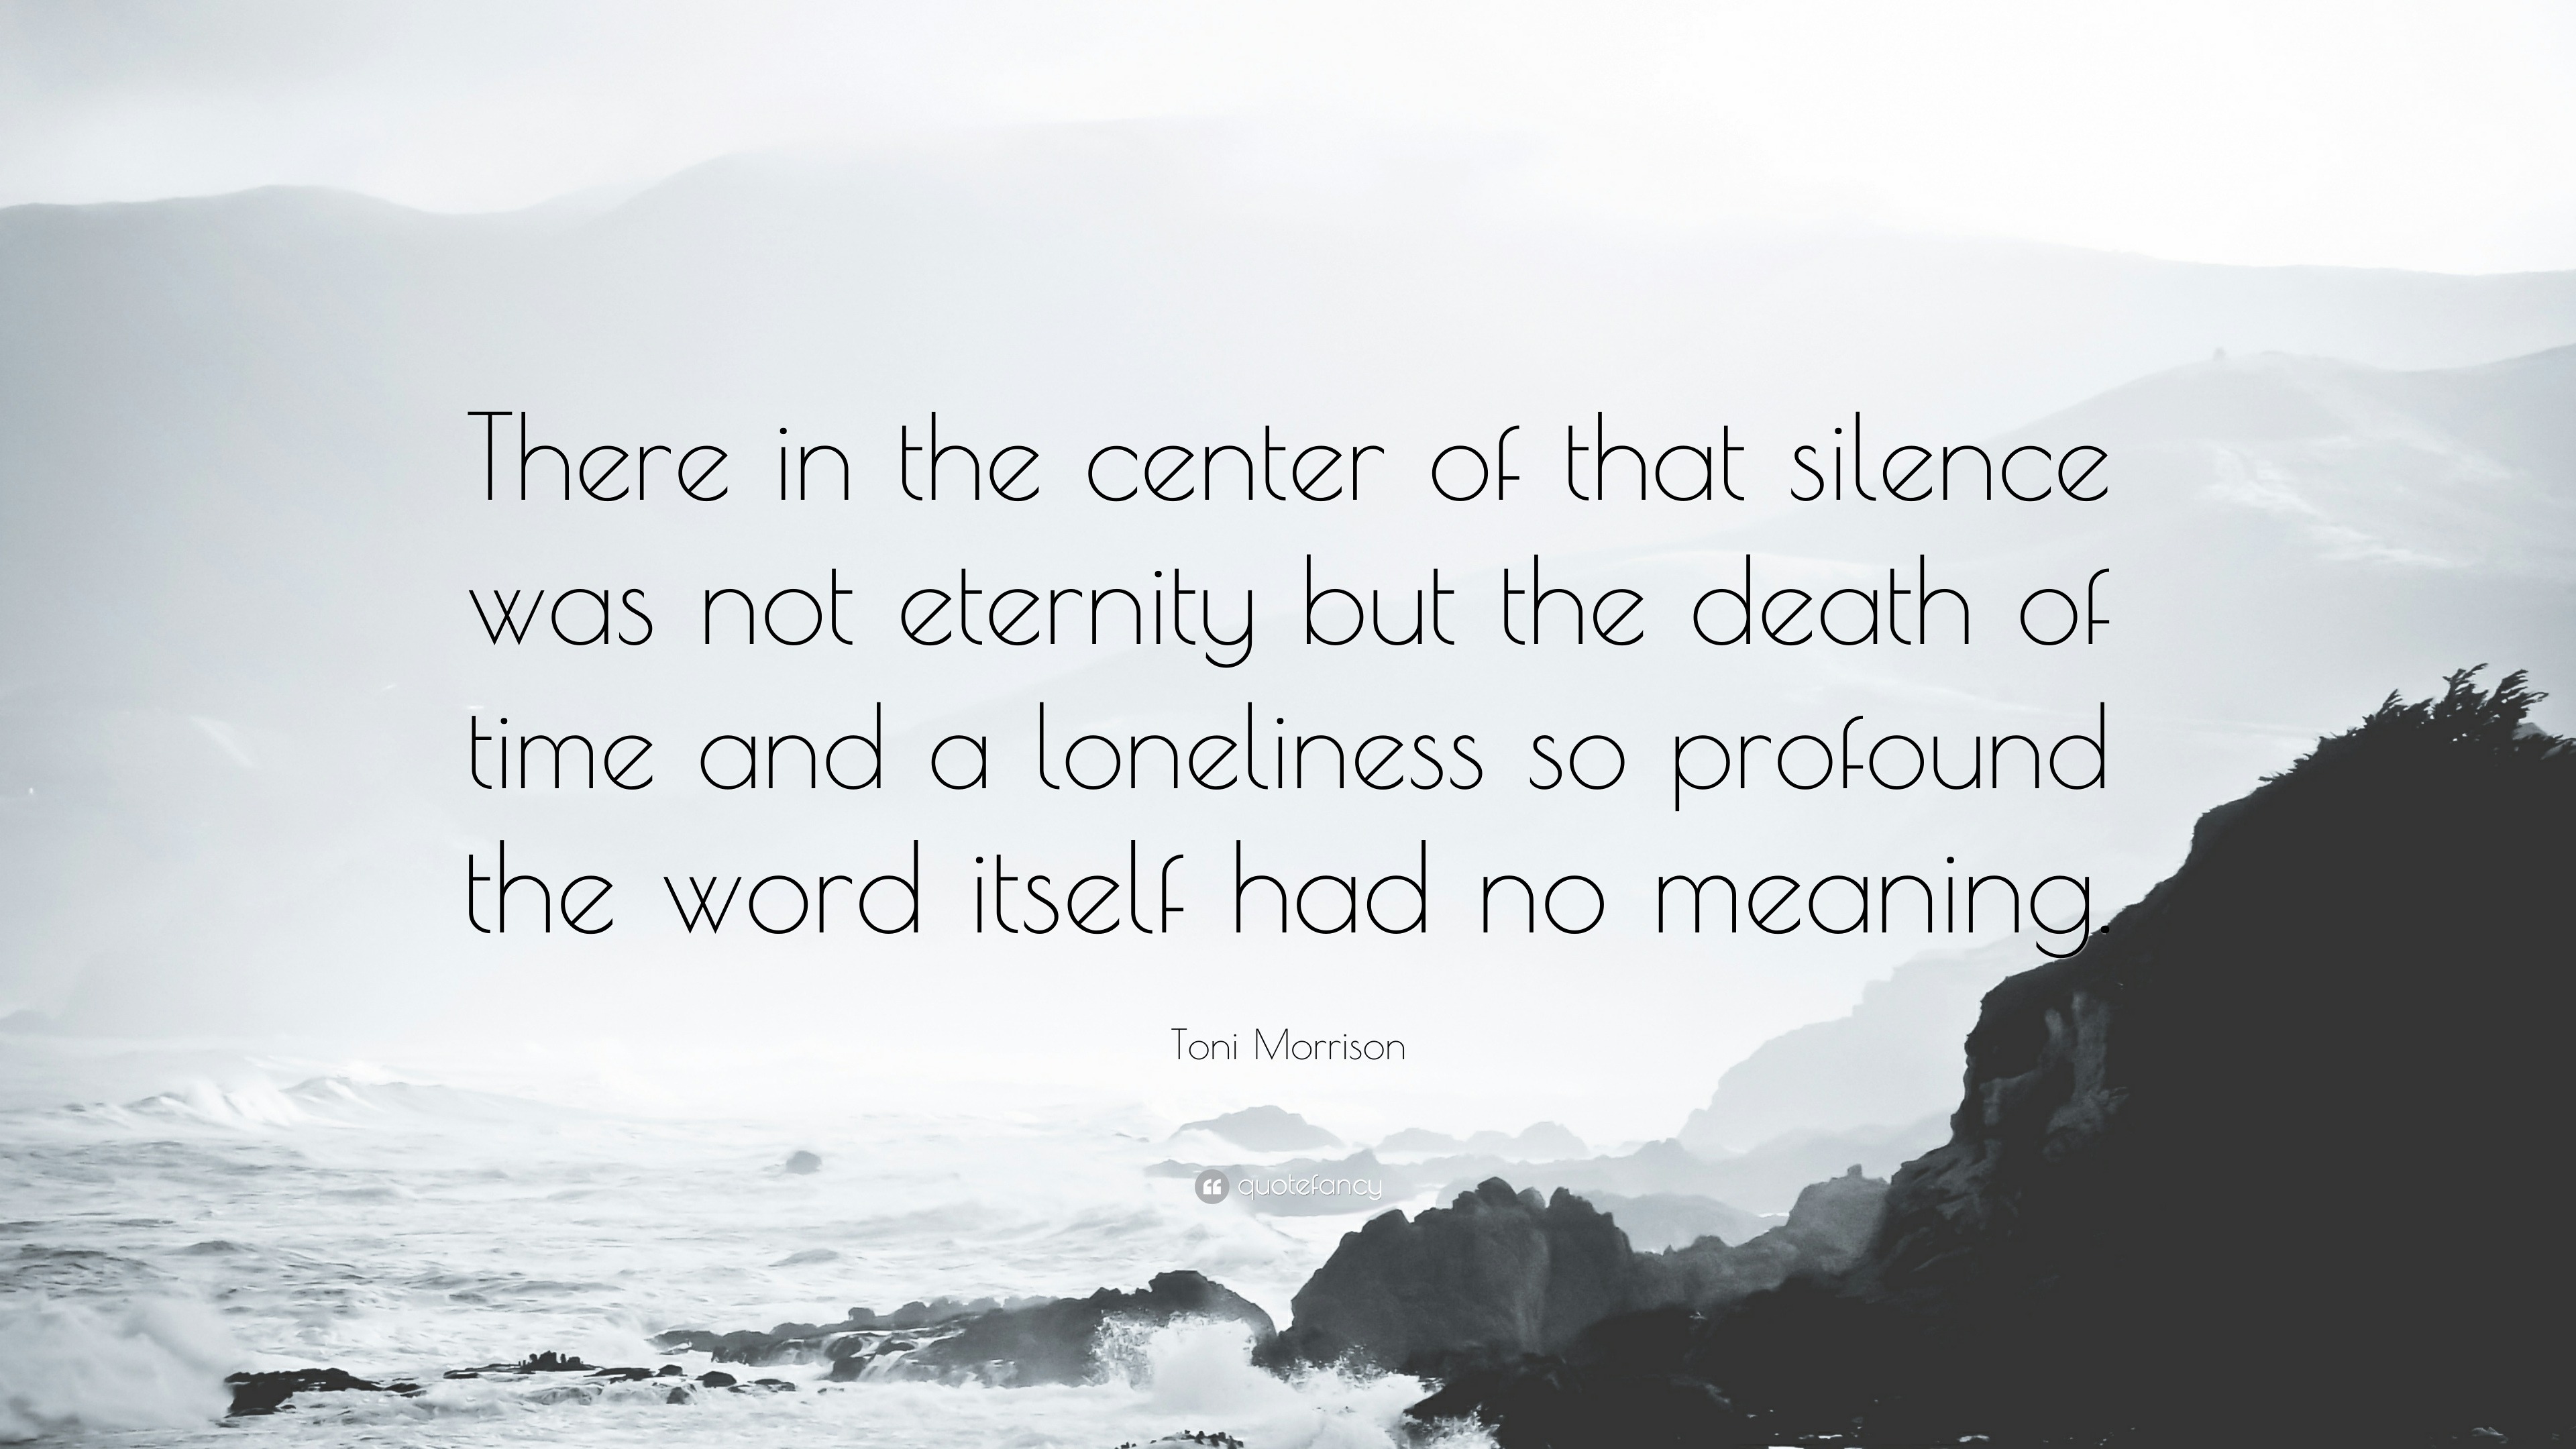 Silence has so much meaning. - Quote